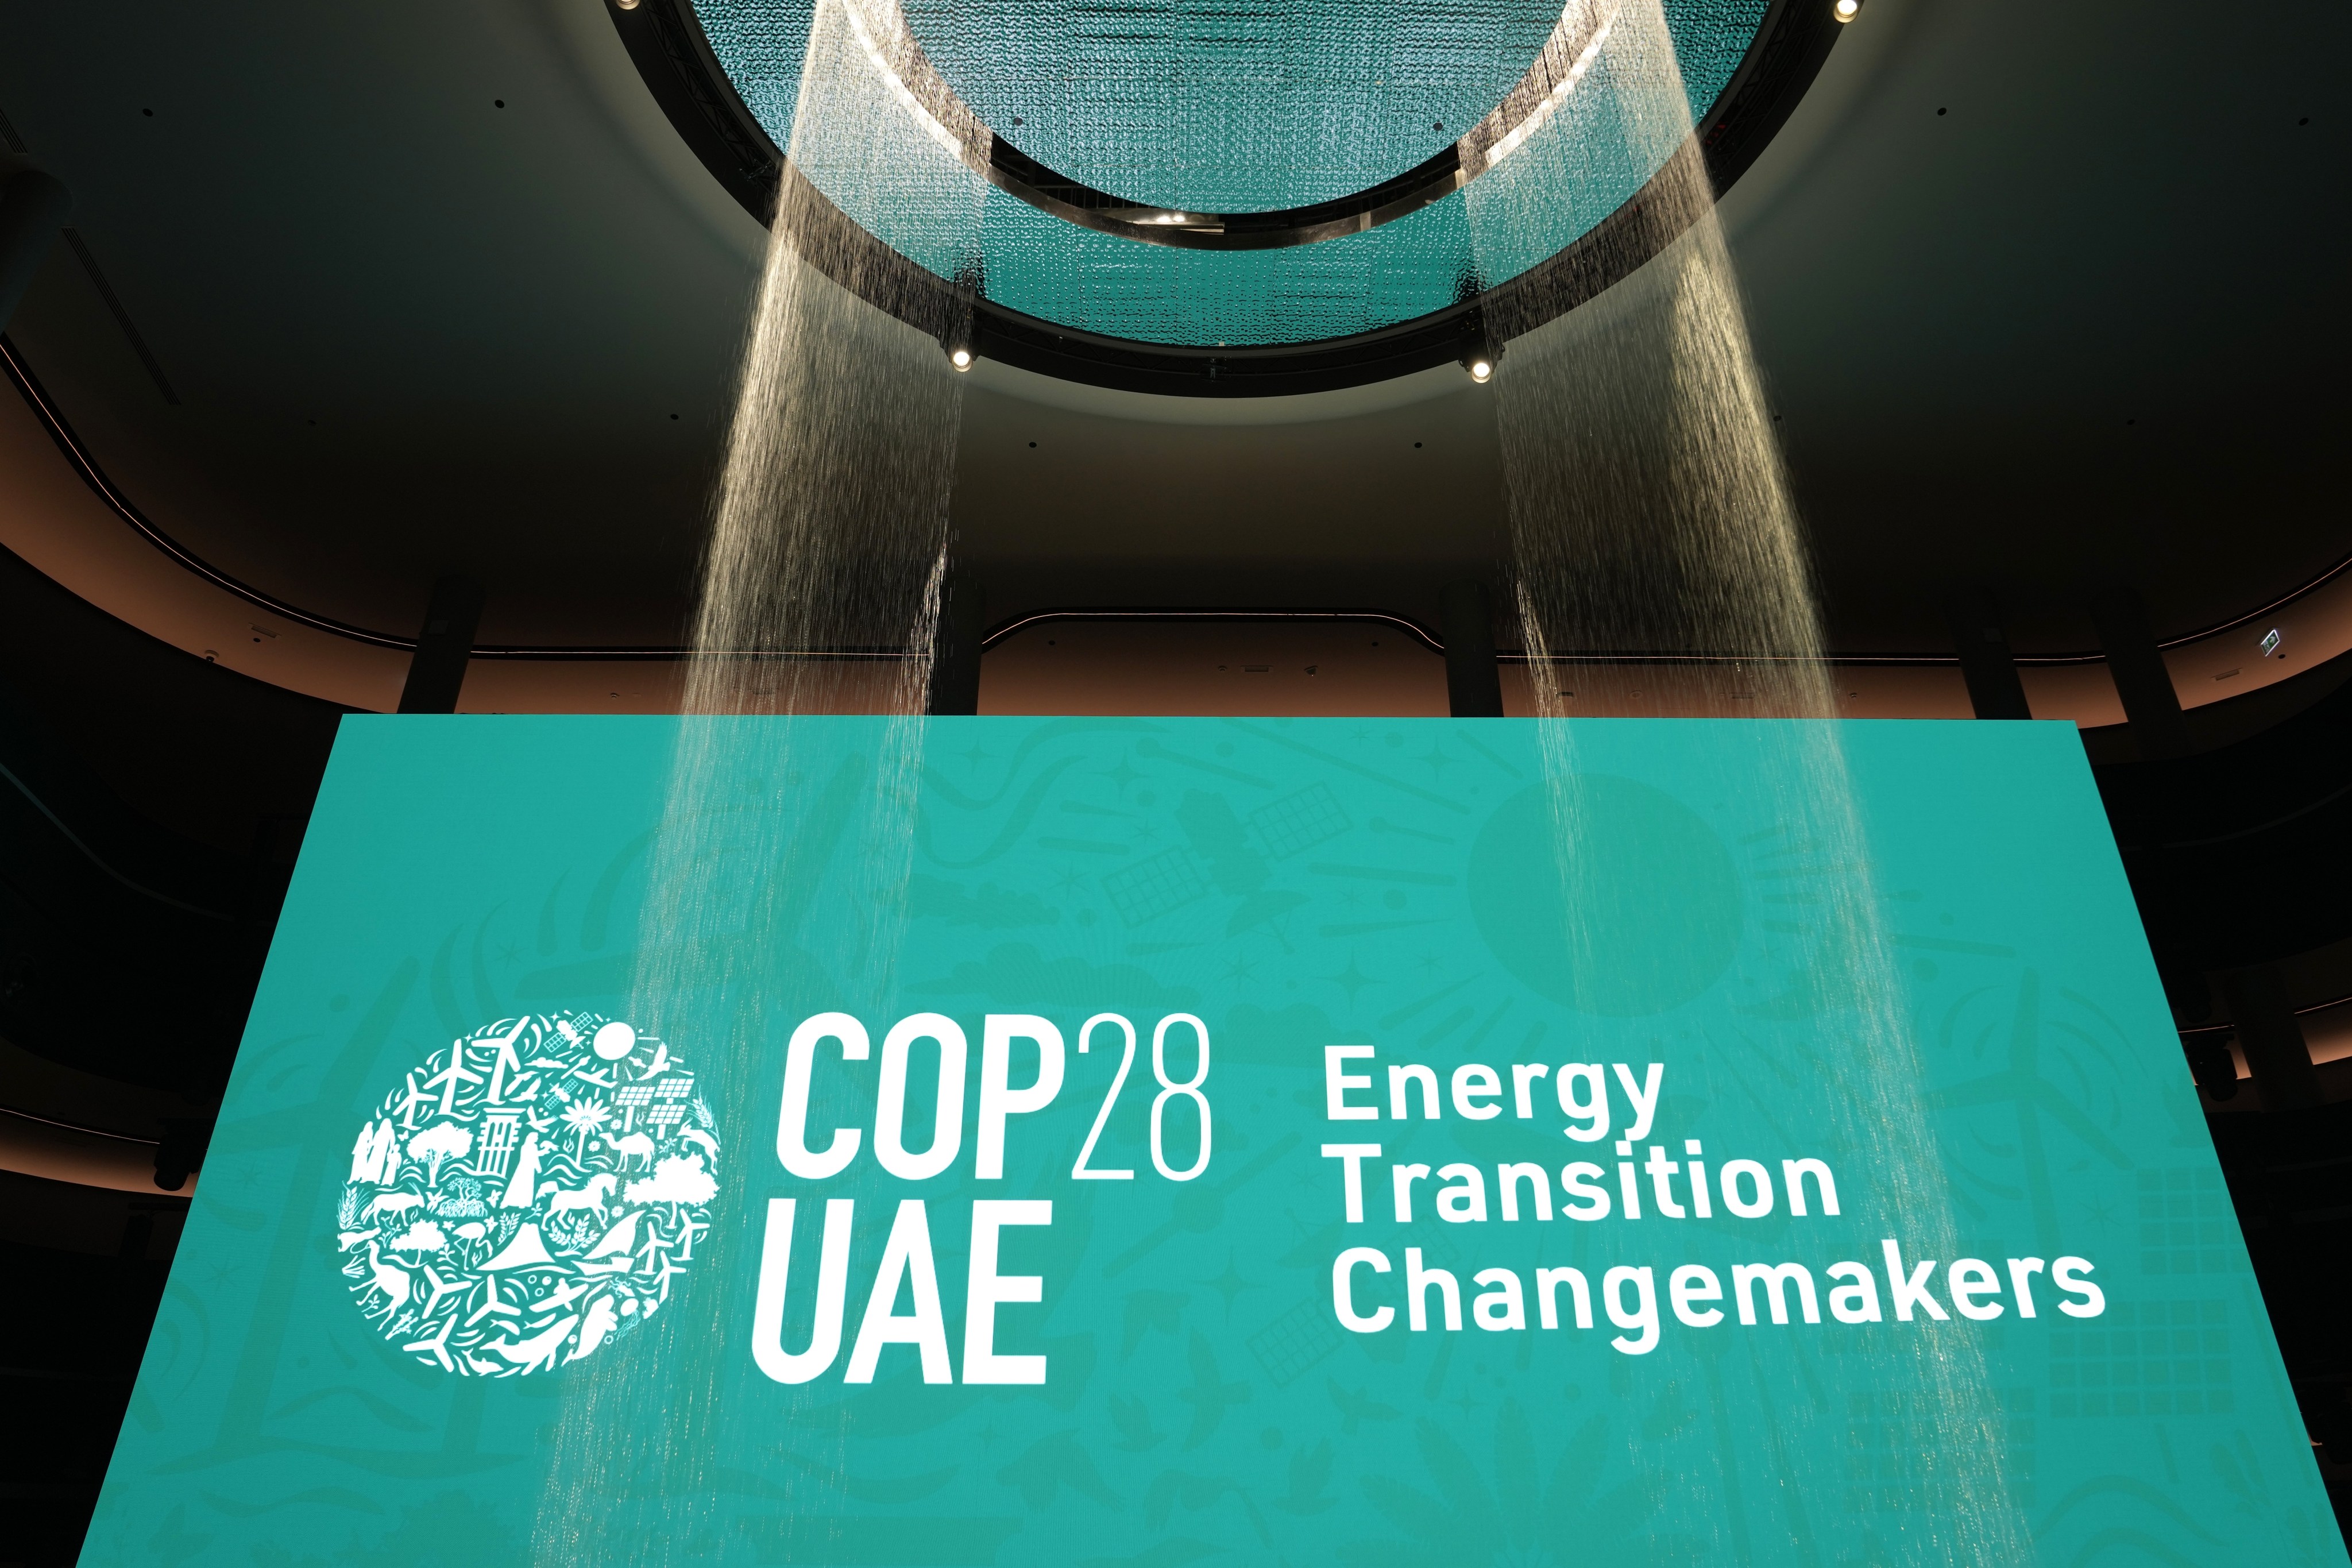 The Cop28 global climate summit is taking place in Dubai. The AIIB is increasing the proportion of loans set aside to finance climate mitigating projects. Photo: AP Photo